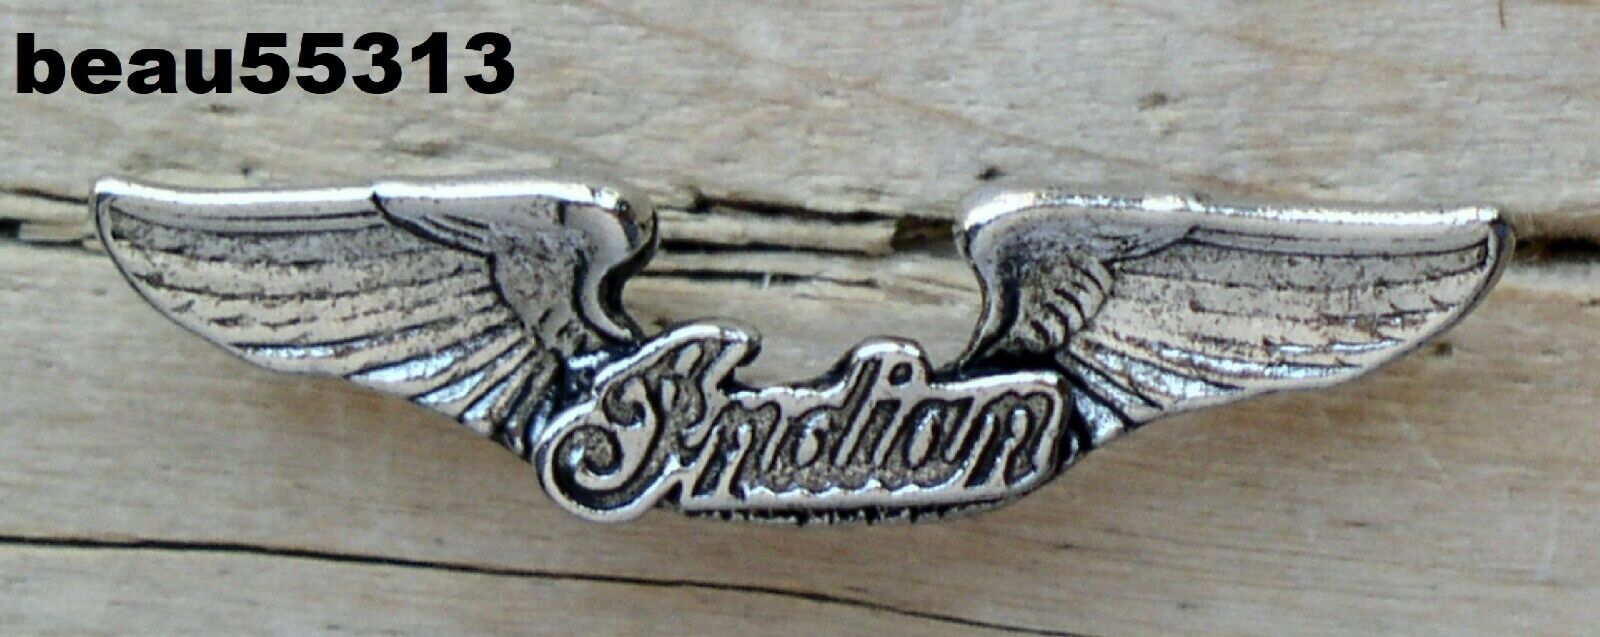 ⭐INDIAN MOTORCYCLE WING JACKET VEST HAT PIN 